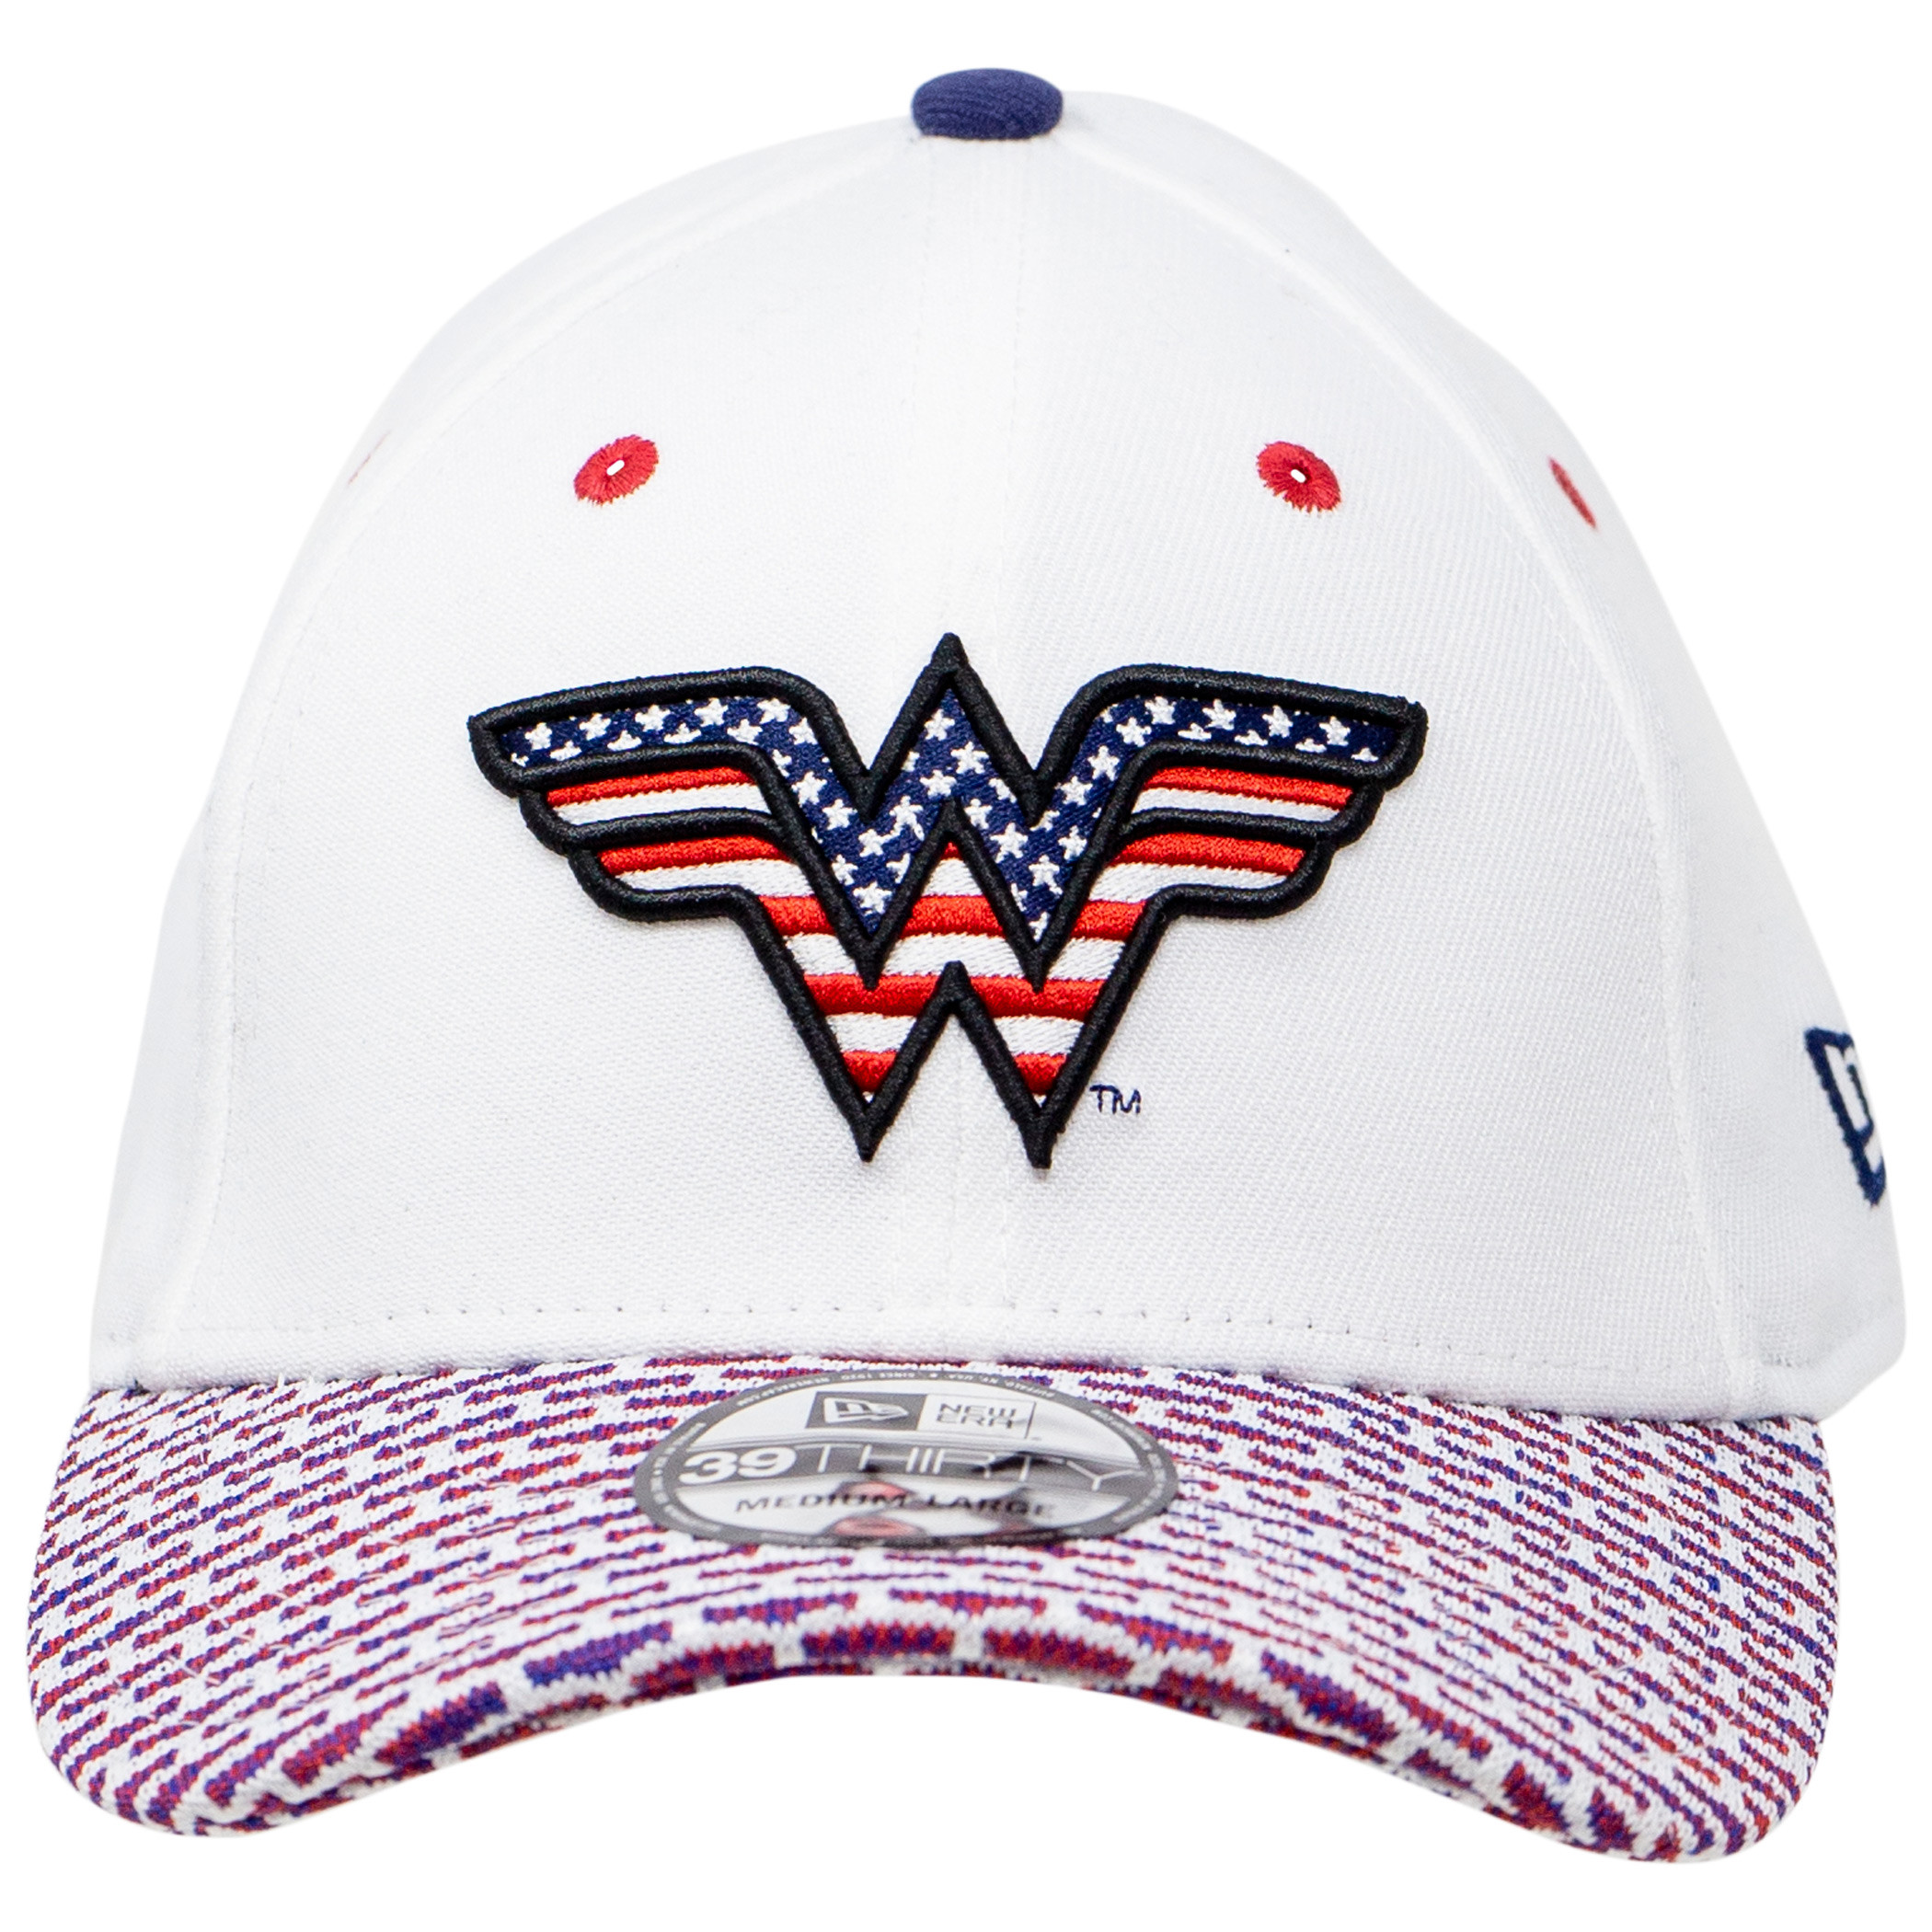 Wonder Woman Red White and Blue Themed New Era 39Thirty Fitted Hat